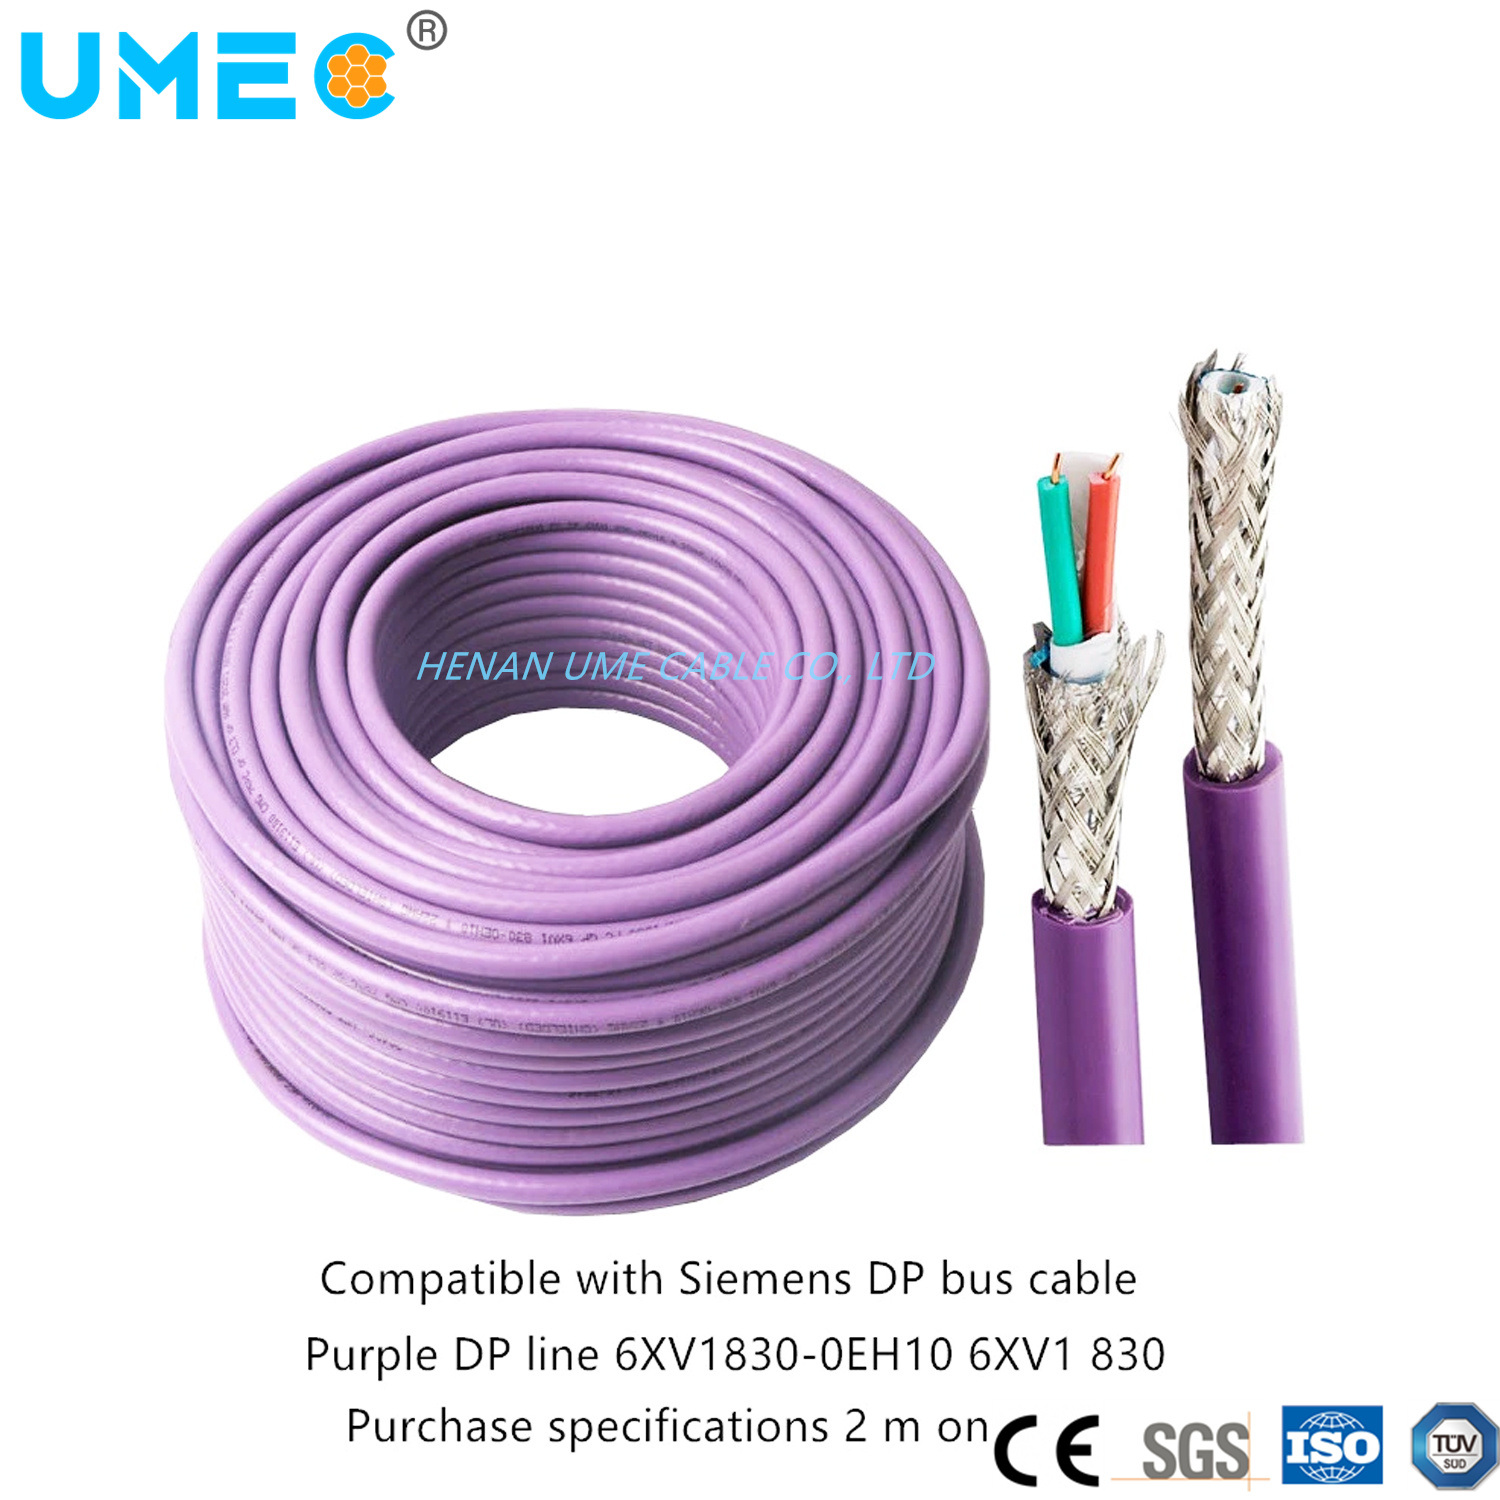 Factory Price Multicore Cable 6xv1830-0eh10 Communication Cable PVC Sheath Cable Shielded Cable